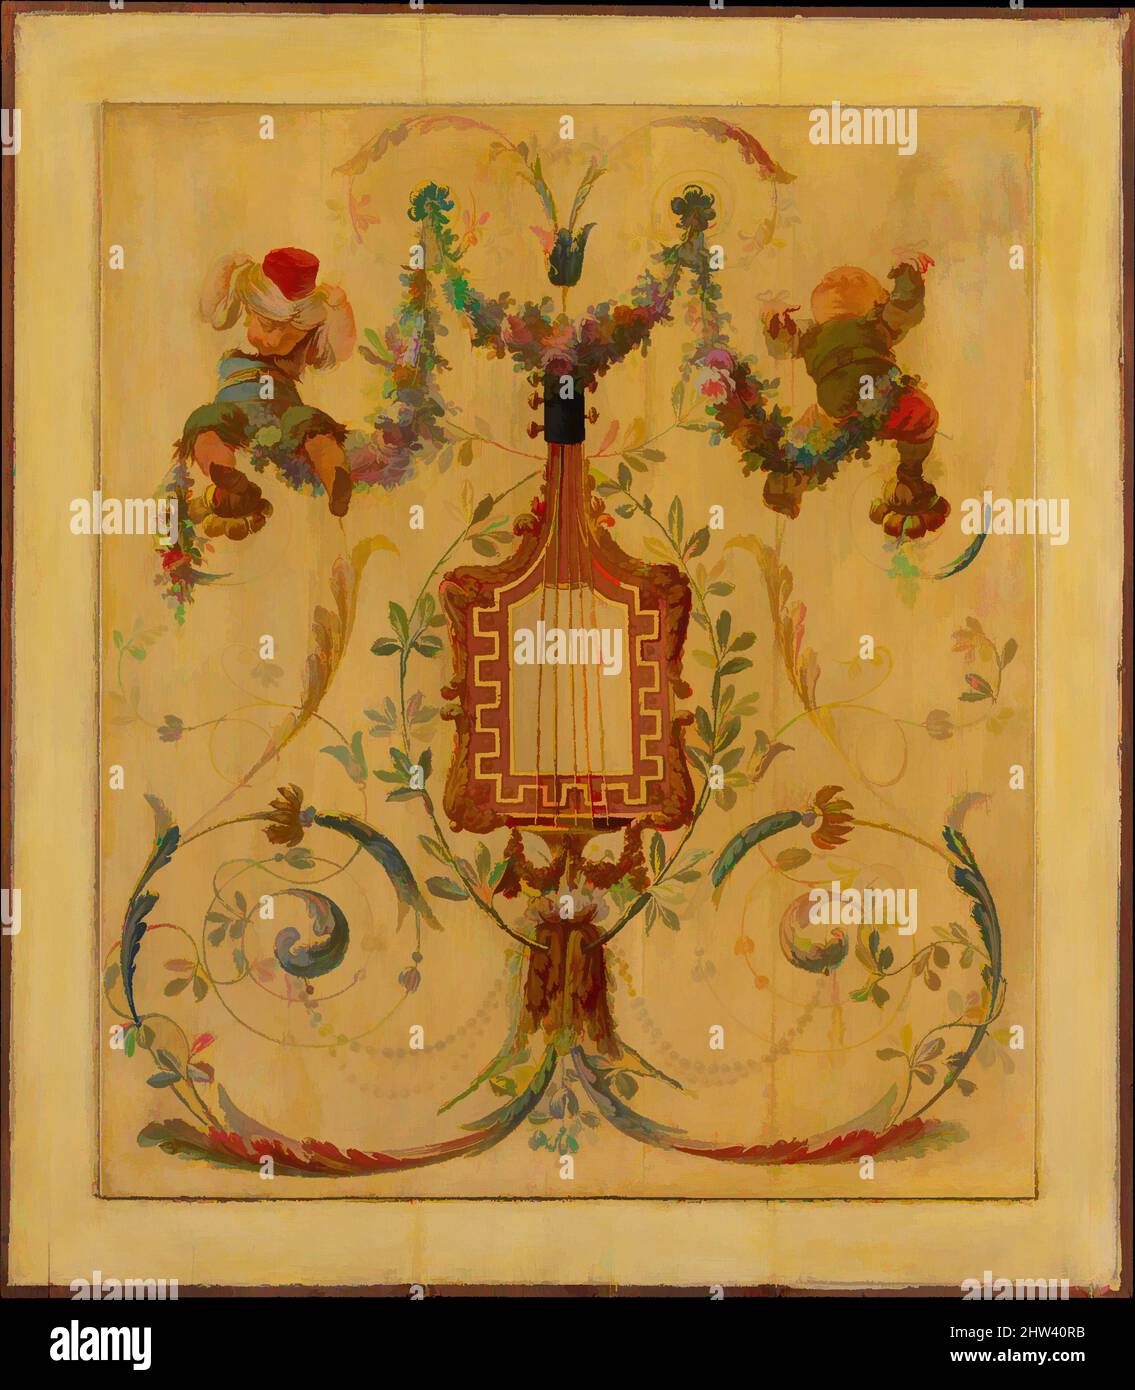 Art inspired by Door panel from the 'Cabinet Turc' of Comte d'Artois at Versailles, 1781, French, Oil on oak, Overall (confirmed): 33 1/8 x 28 7/8 x 1 3/8 in. (84.1 x 73.3 x 3.5 cm); Painted surface: 27 7/8 x 23 1/2 in. (70.8 x 59.7 cm), Paintings-Decorative, Attributed to Jean -Siméon, Classic works modernized by Artotop with a splash of modernity. Shapes, color and value, eye-catching visual impact on art. Emotions through freedom of artworks in a contemporary way. A timeless message pursuing a wildly creative new direction. Artists turning to the digital medium and creating the Artotop NFT Stock Photo